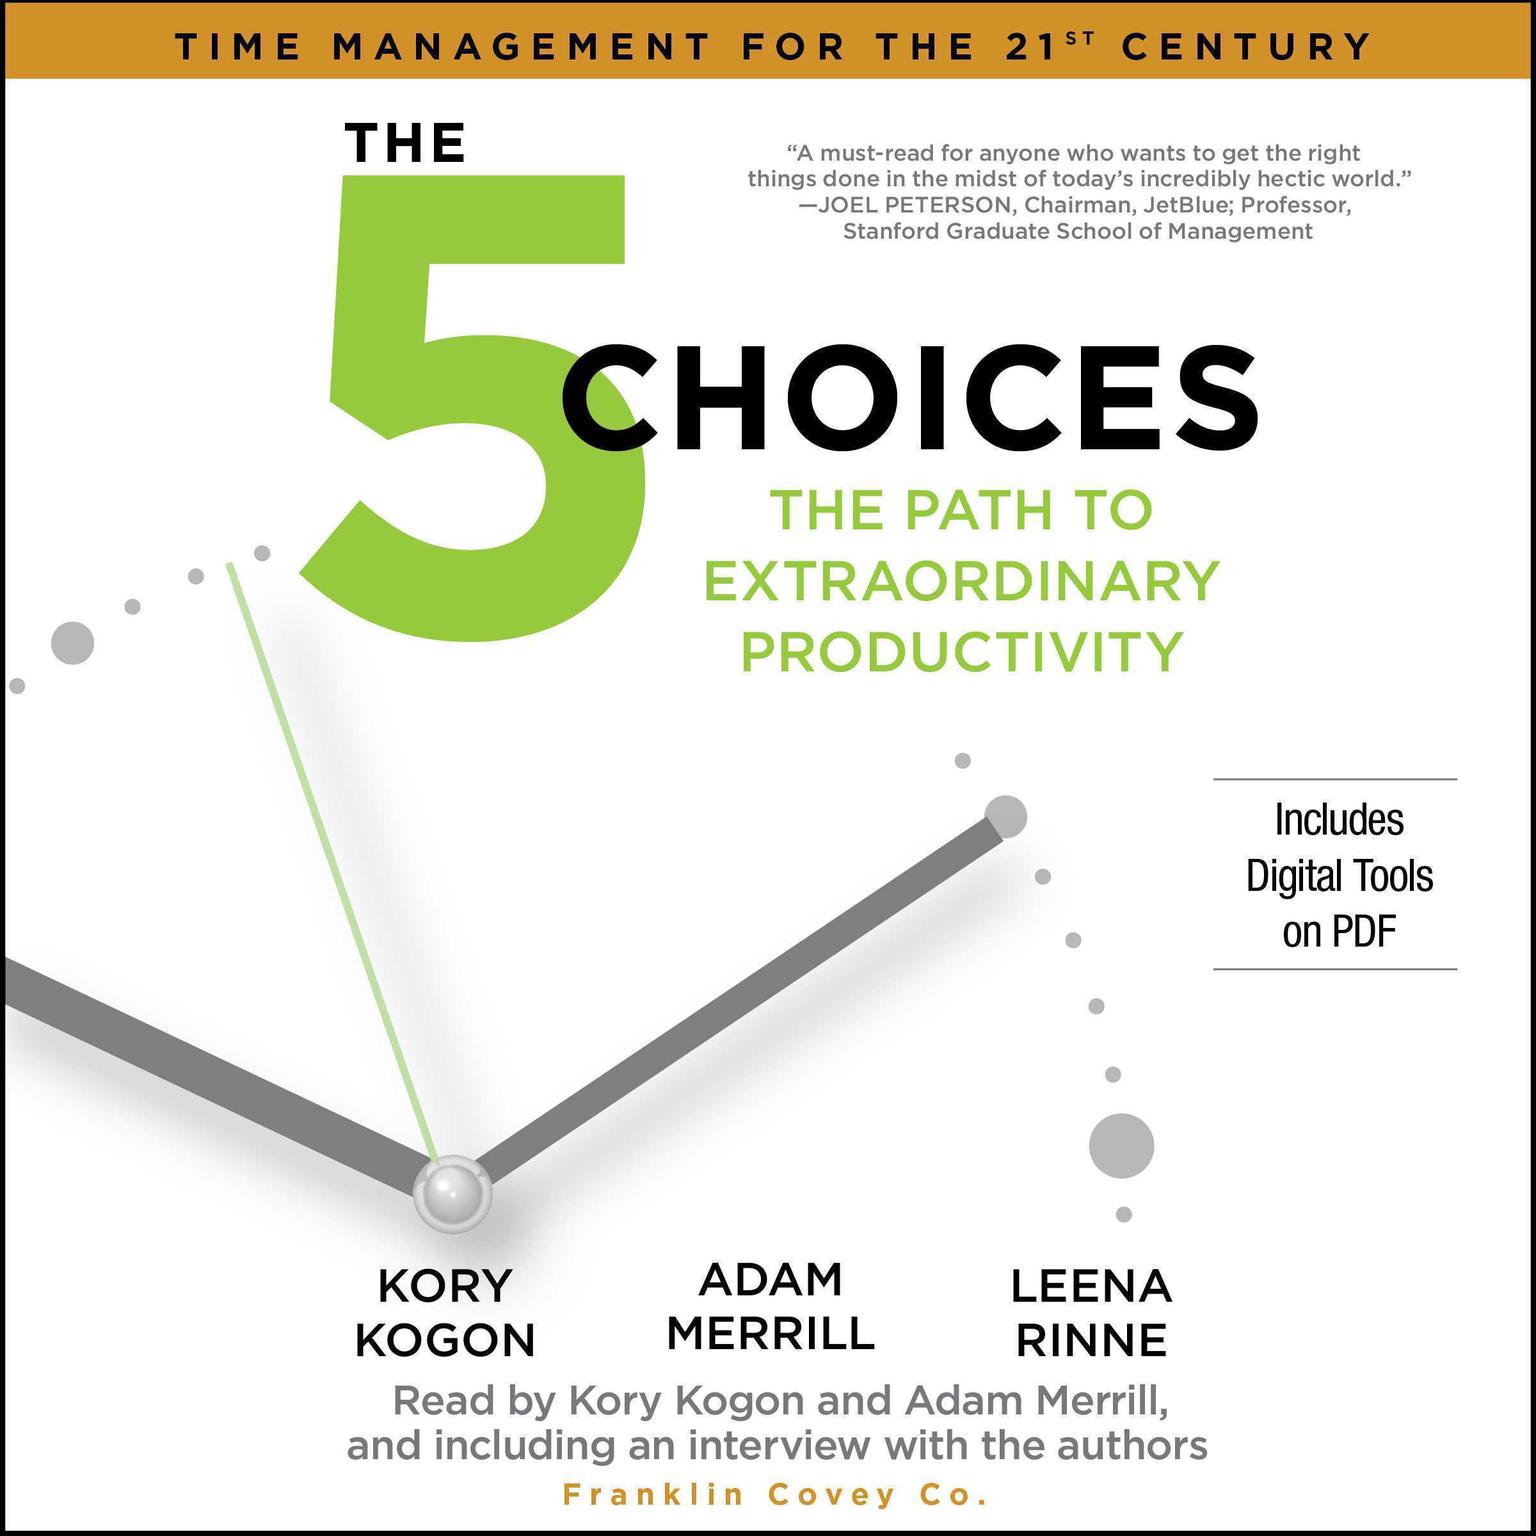 5 choices to extraordinary productivity review